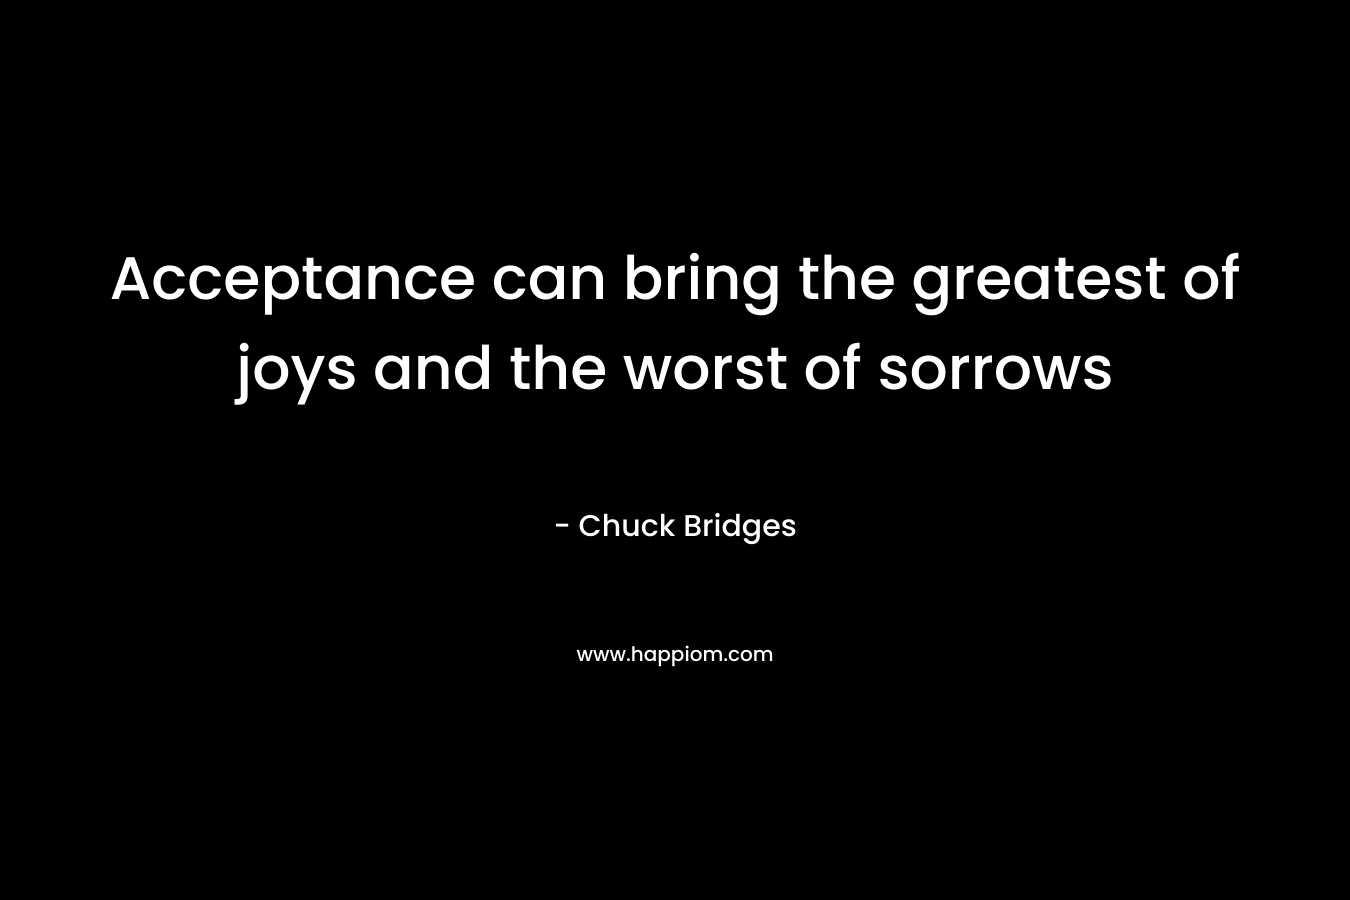 Acceptance can bring the greatest of joys and the worst of sorrows